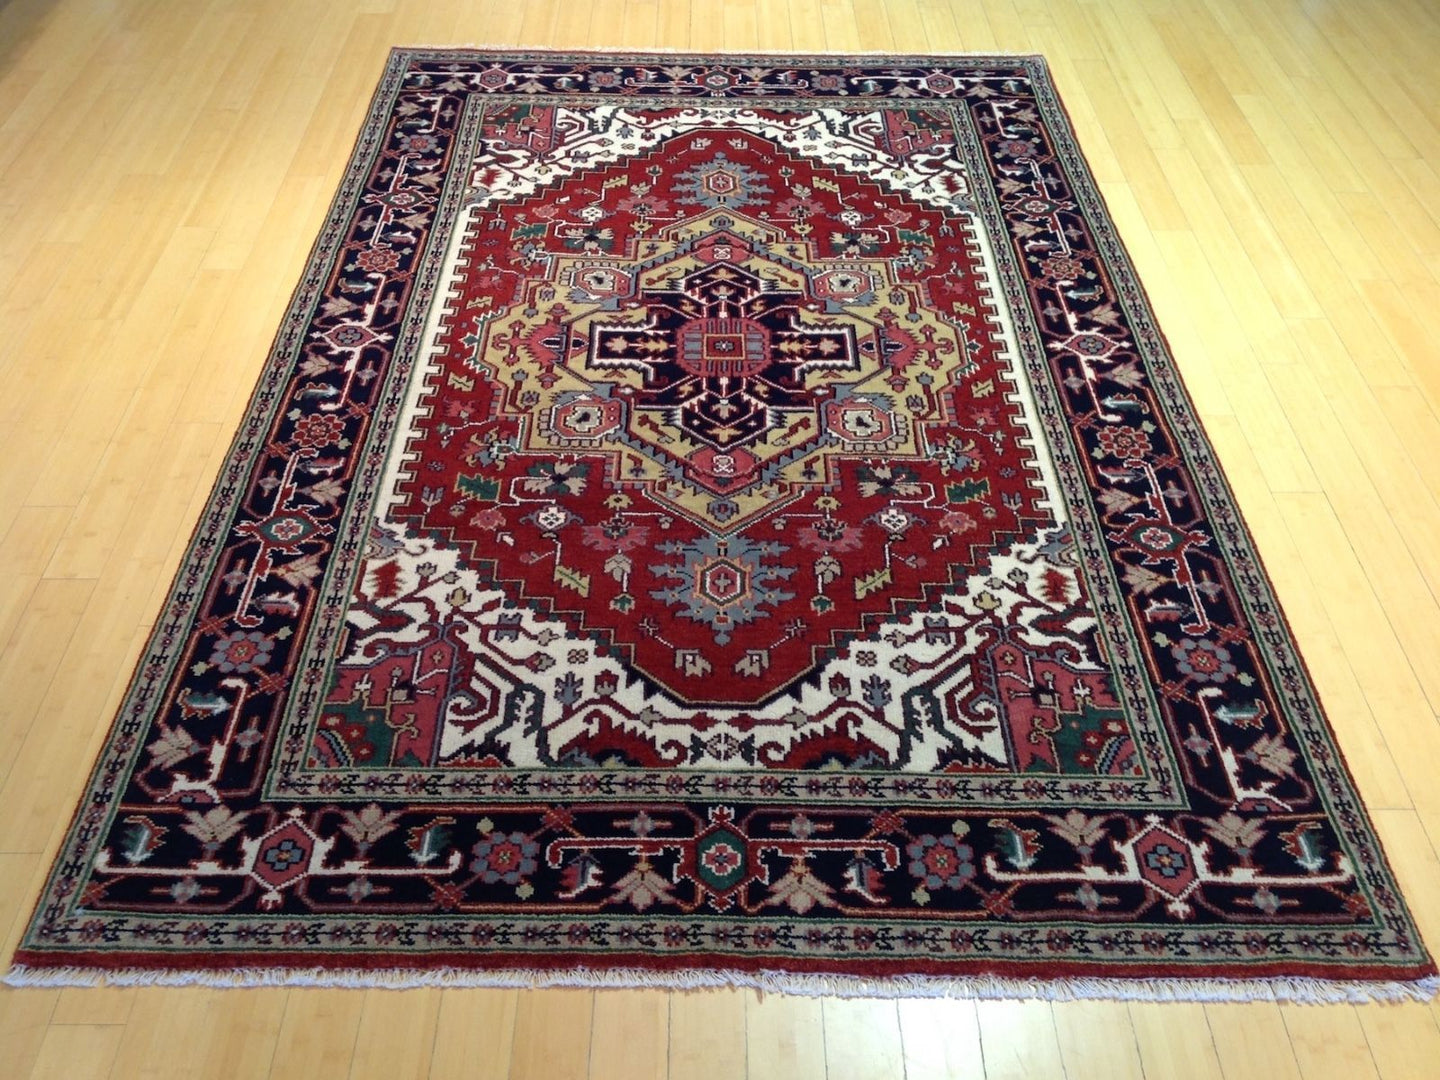 Oriental rugs, hand-knotted carpets, sustainable rugs, classic world oriental rugs, handmade, United States, interior design,  Brral-306